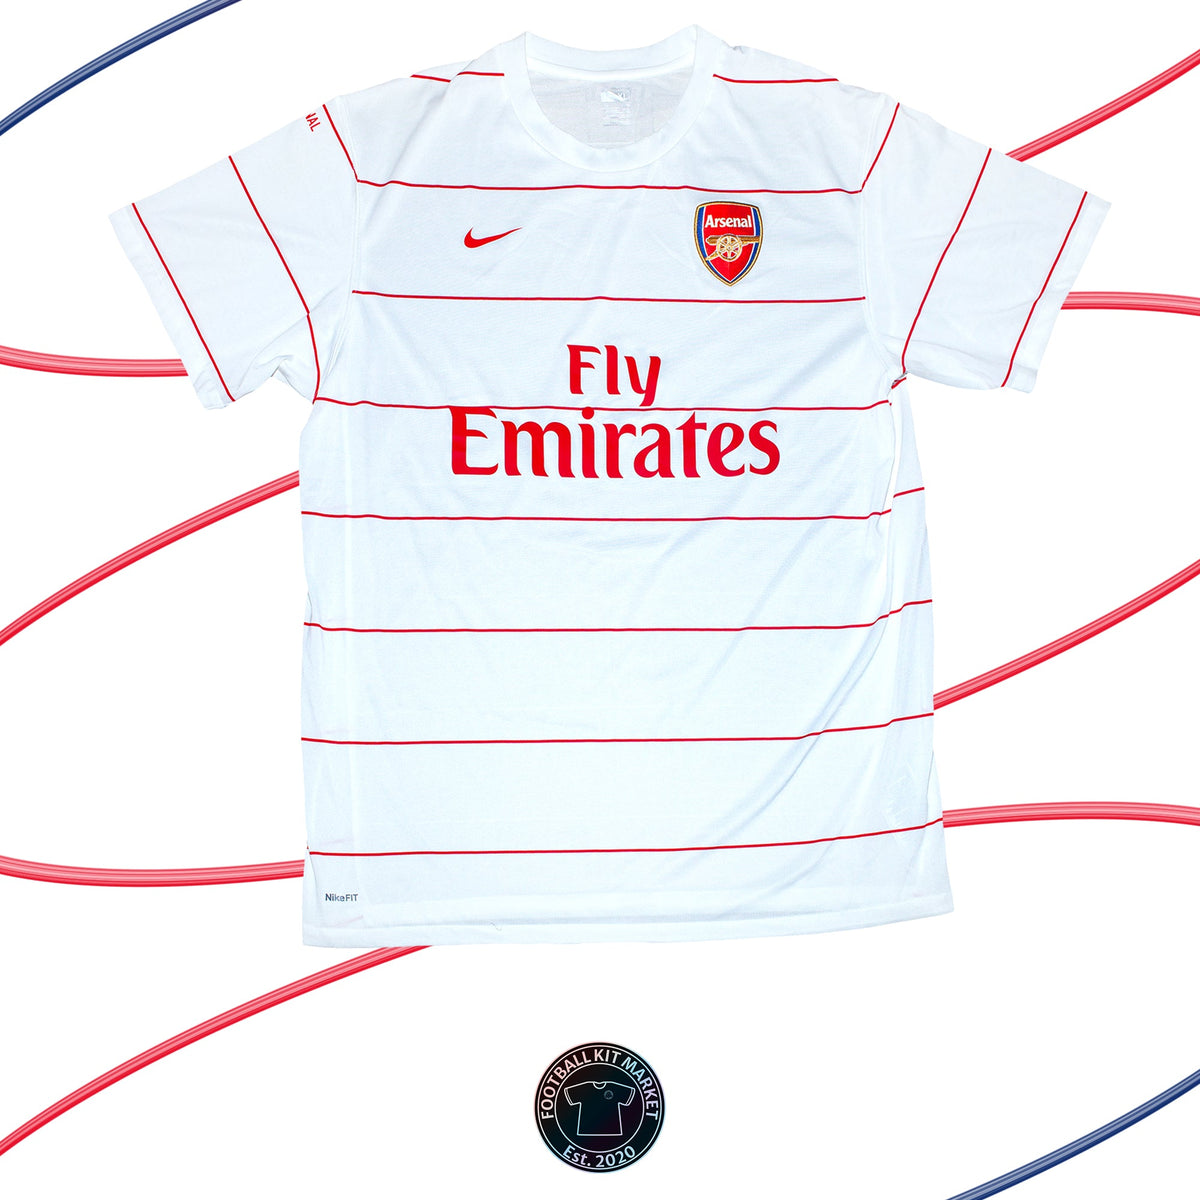 Genuine ARSENAL Pre-Match (2008-2009) - NIKE (XL) - Product Image from Football Kit Market